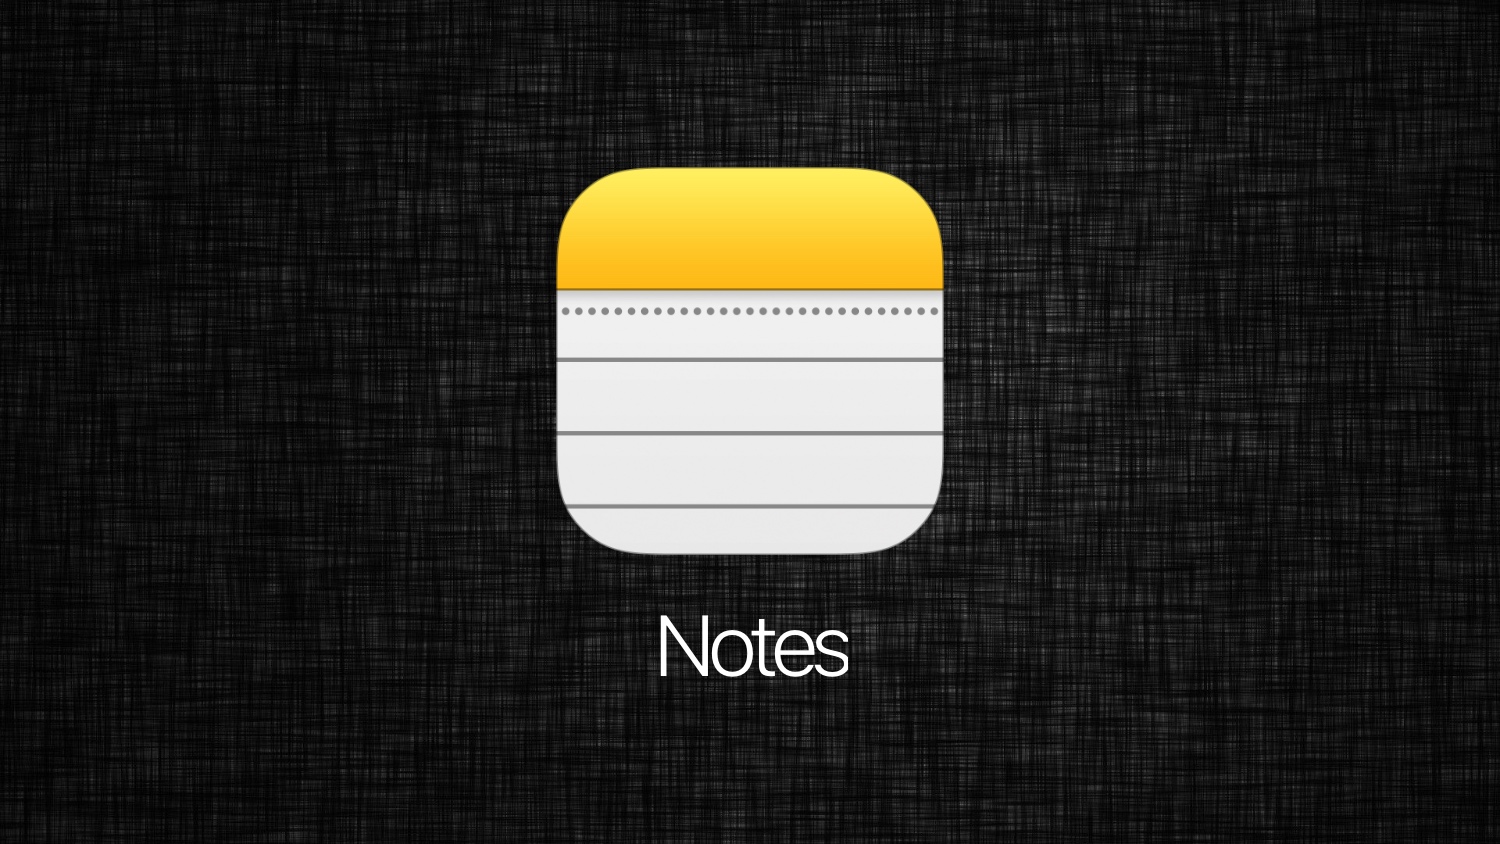 Use Tags and Smart Folders in Notes on your iPhone and iPad - Apple Support